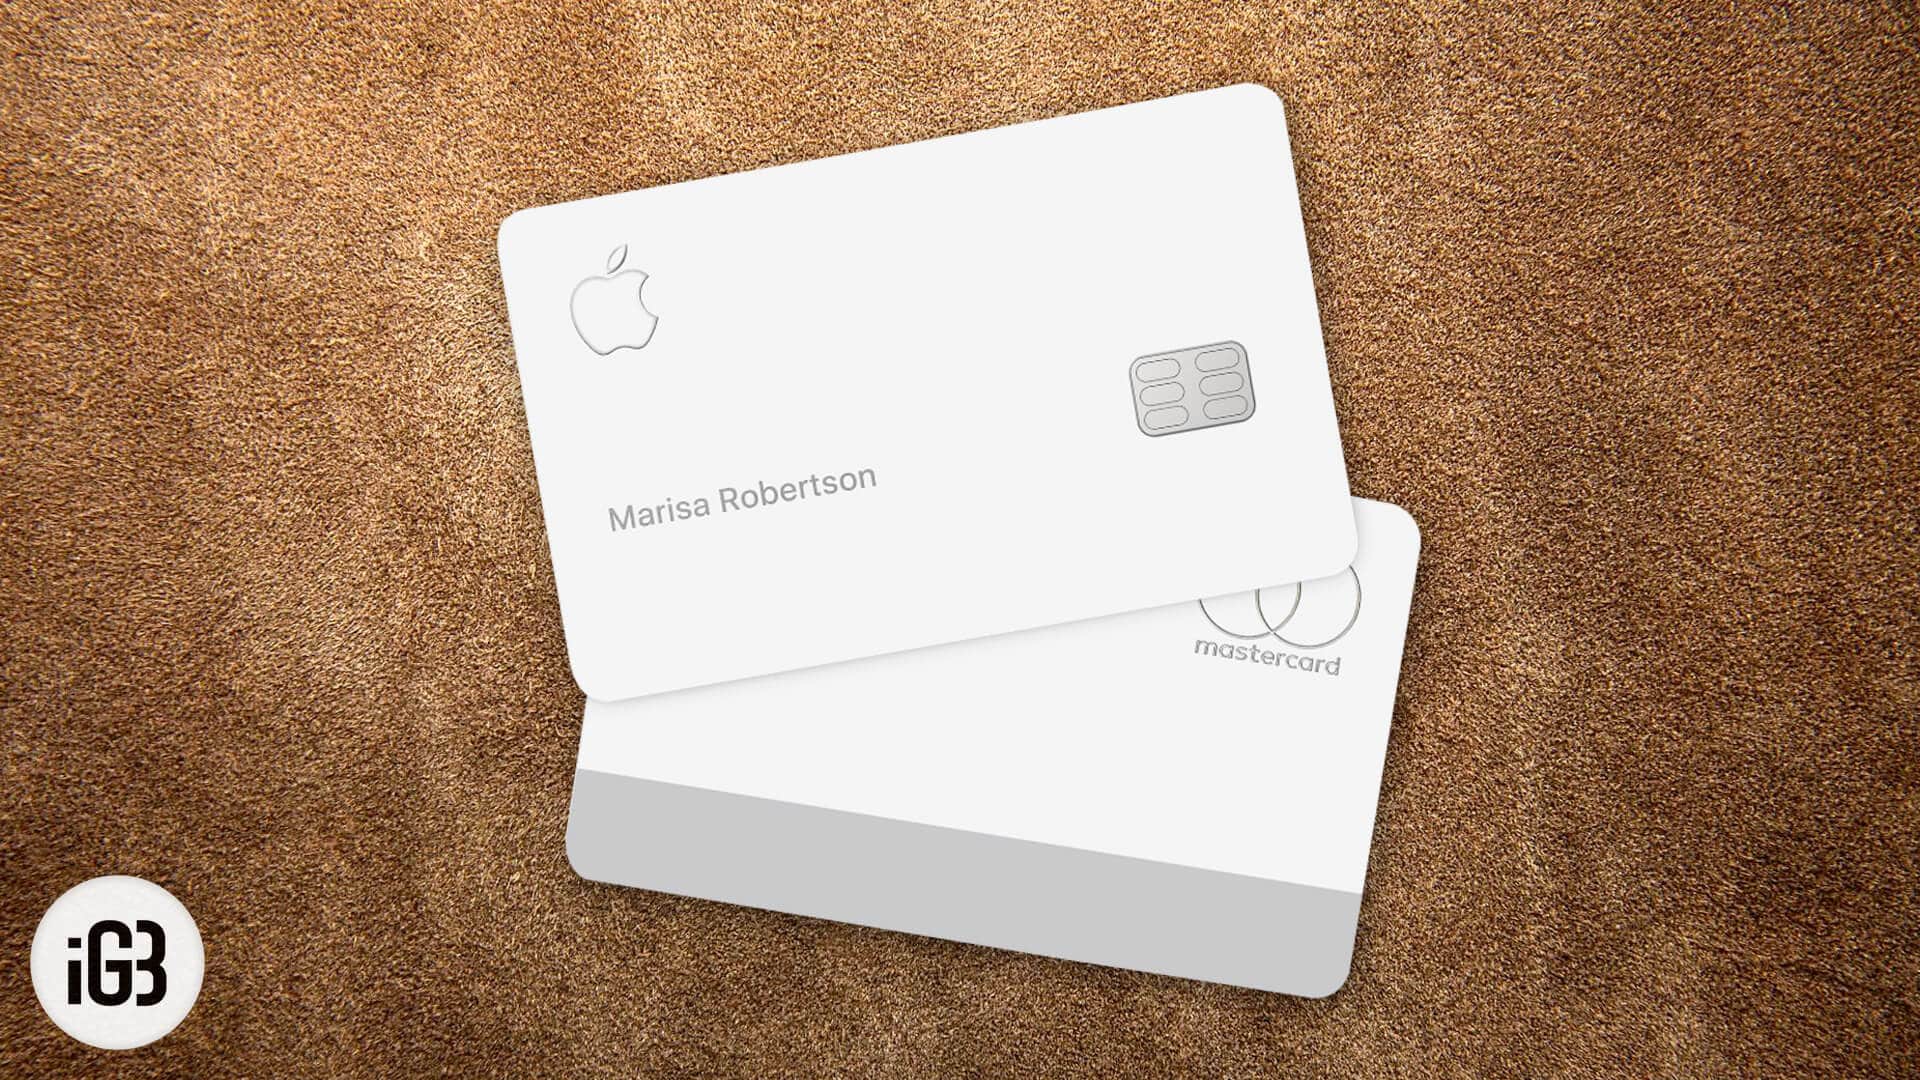 How to change name on your titanium apple card